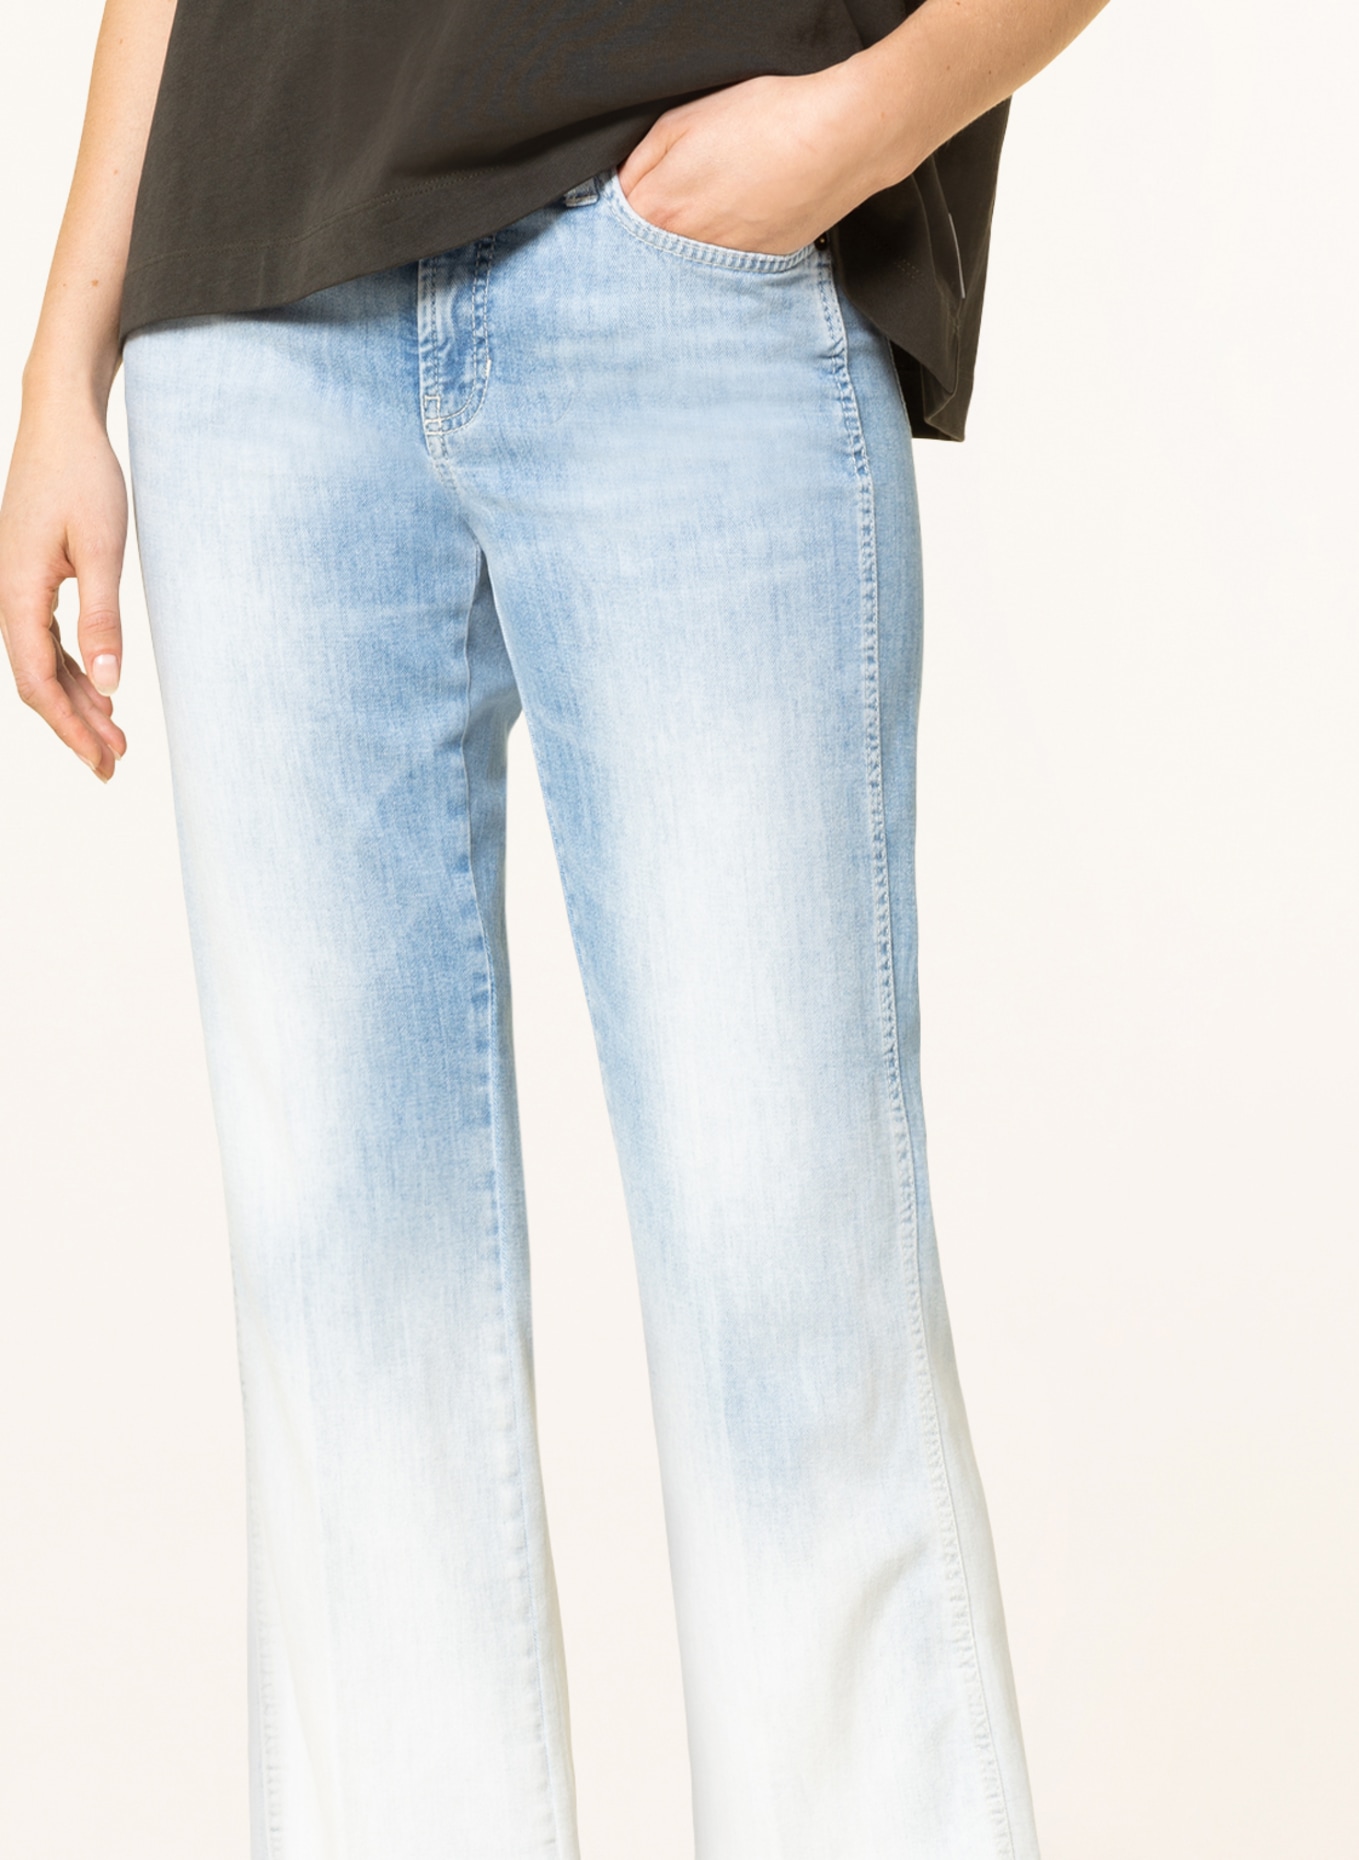 CAMBIO Bootcut jeans FRANCESCA, Color: 5323 summer degrade fringed he (Image 5)